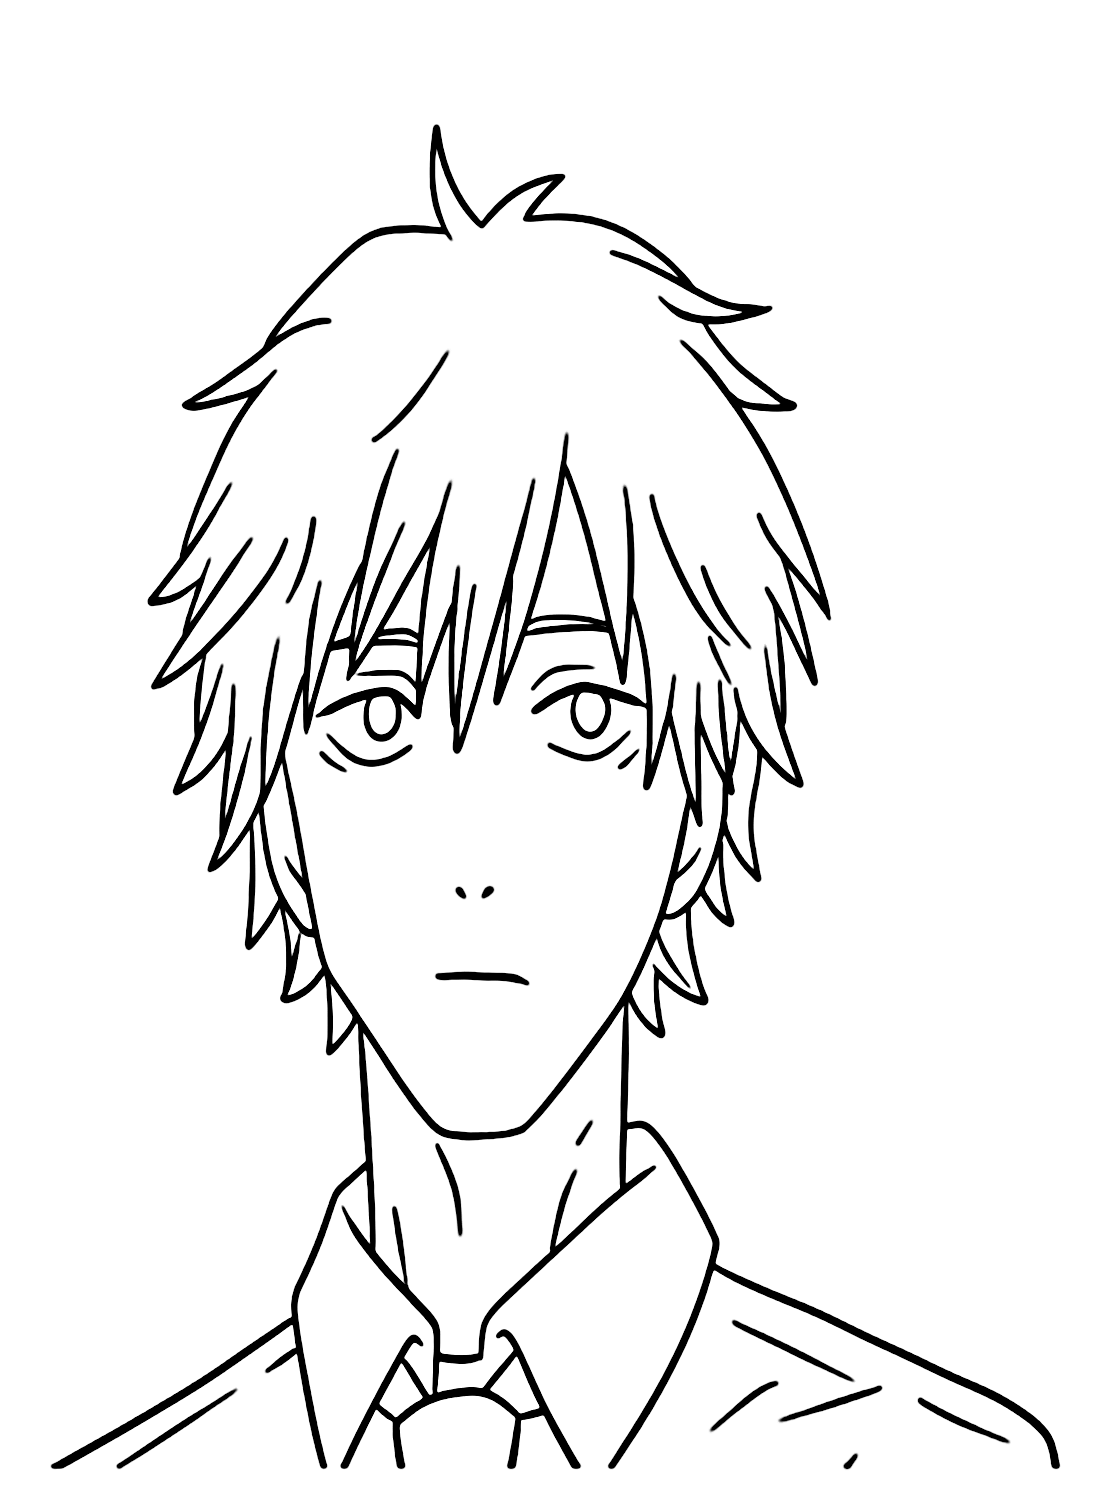 Denji From Chainsaw Man Coloring Pages from Denji